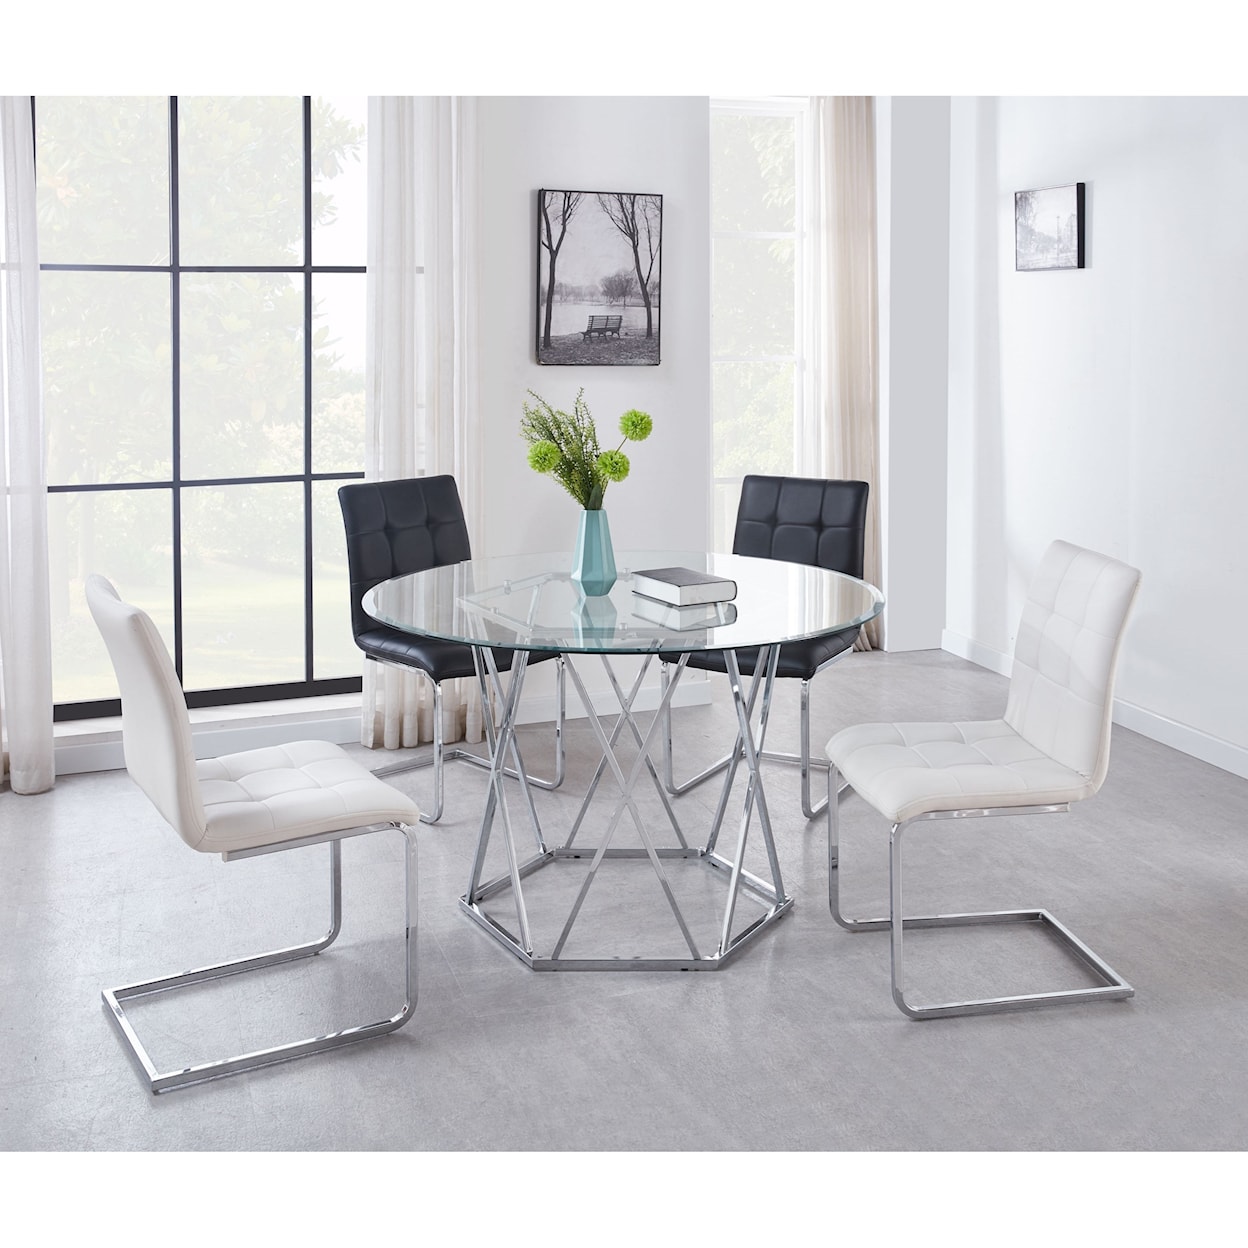 Steve Silver Escondido 5-Piece Table and Chair Set